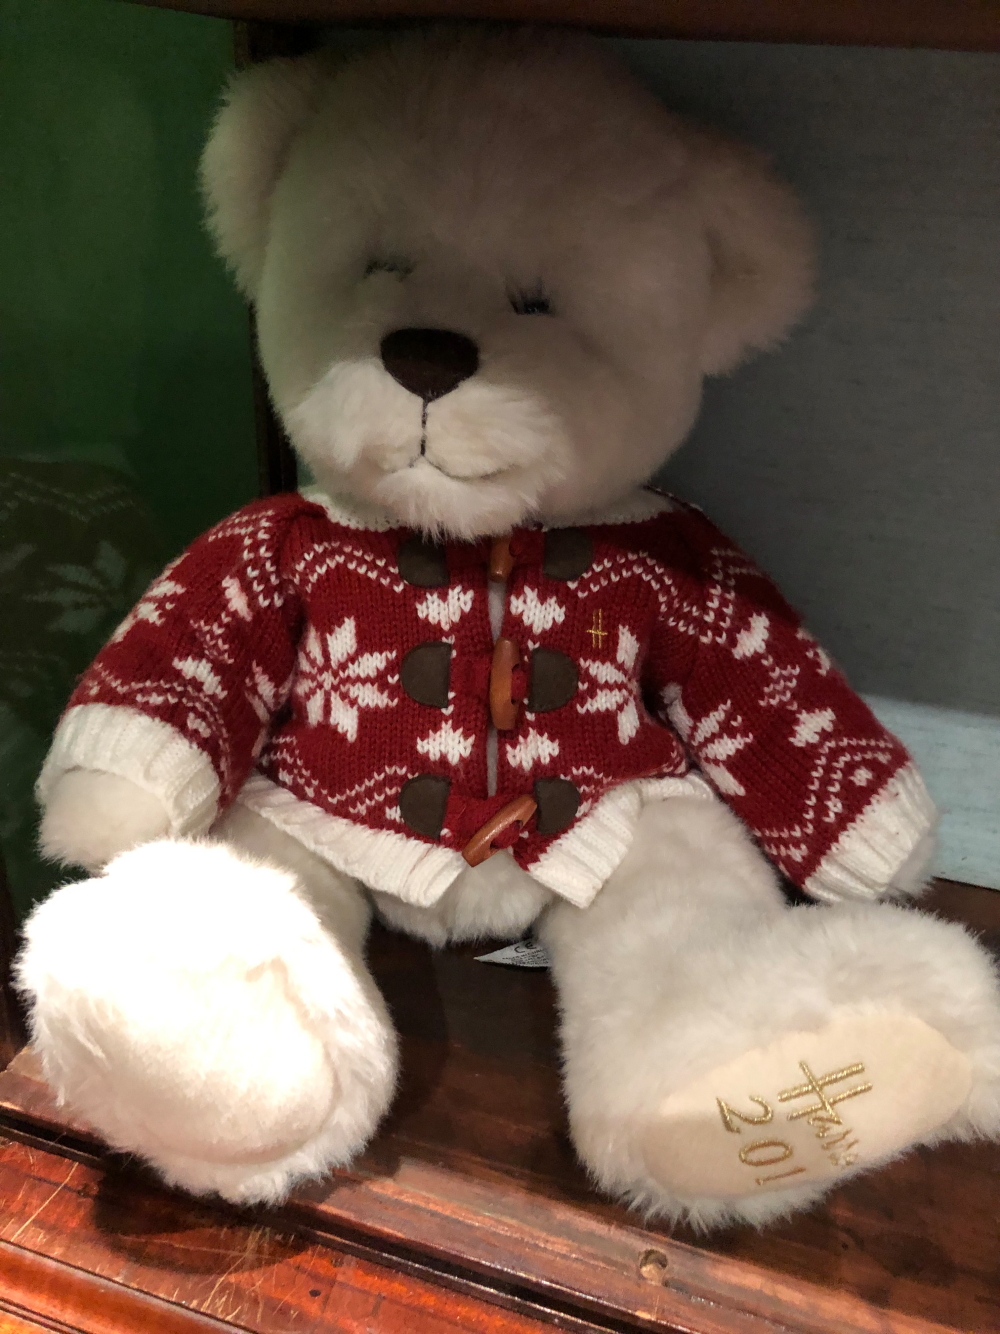 SEVENTEEN HARRODS CHRISTMAS TEDDY BEARS WITH THEIR DATES SEWN ONTO THEIR FEET - Image 3 of 4